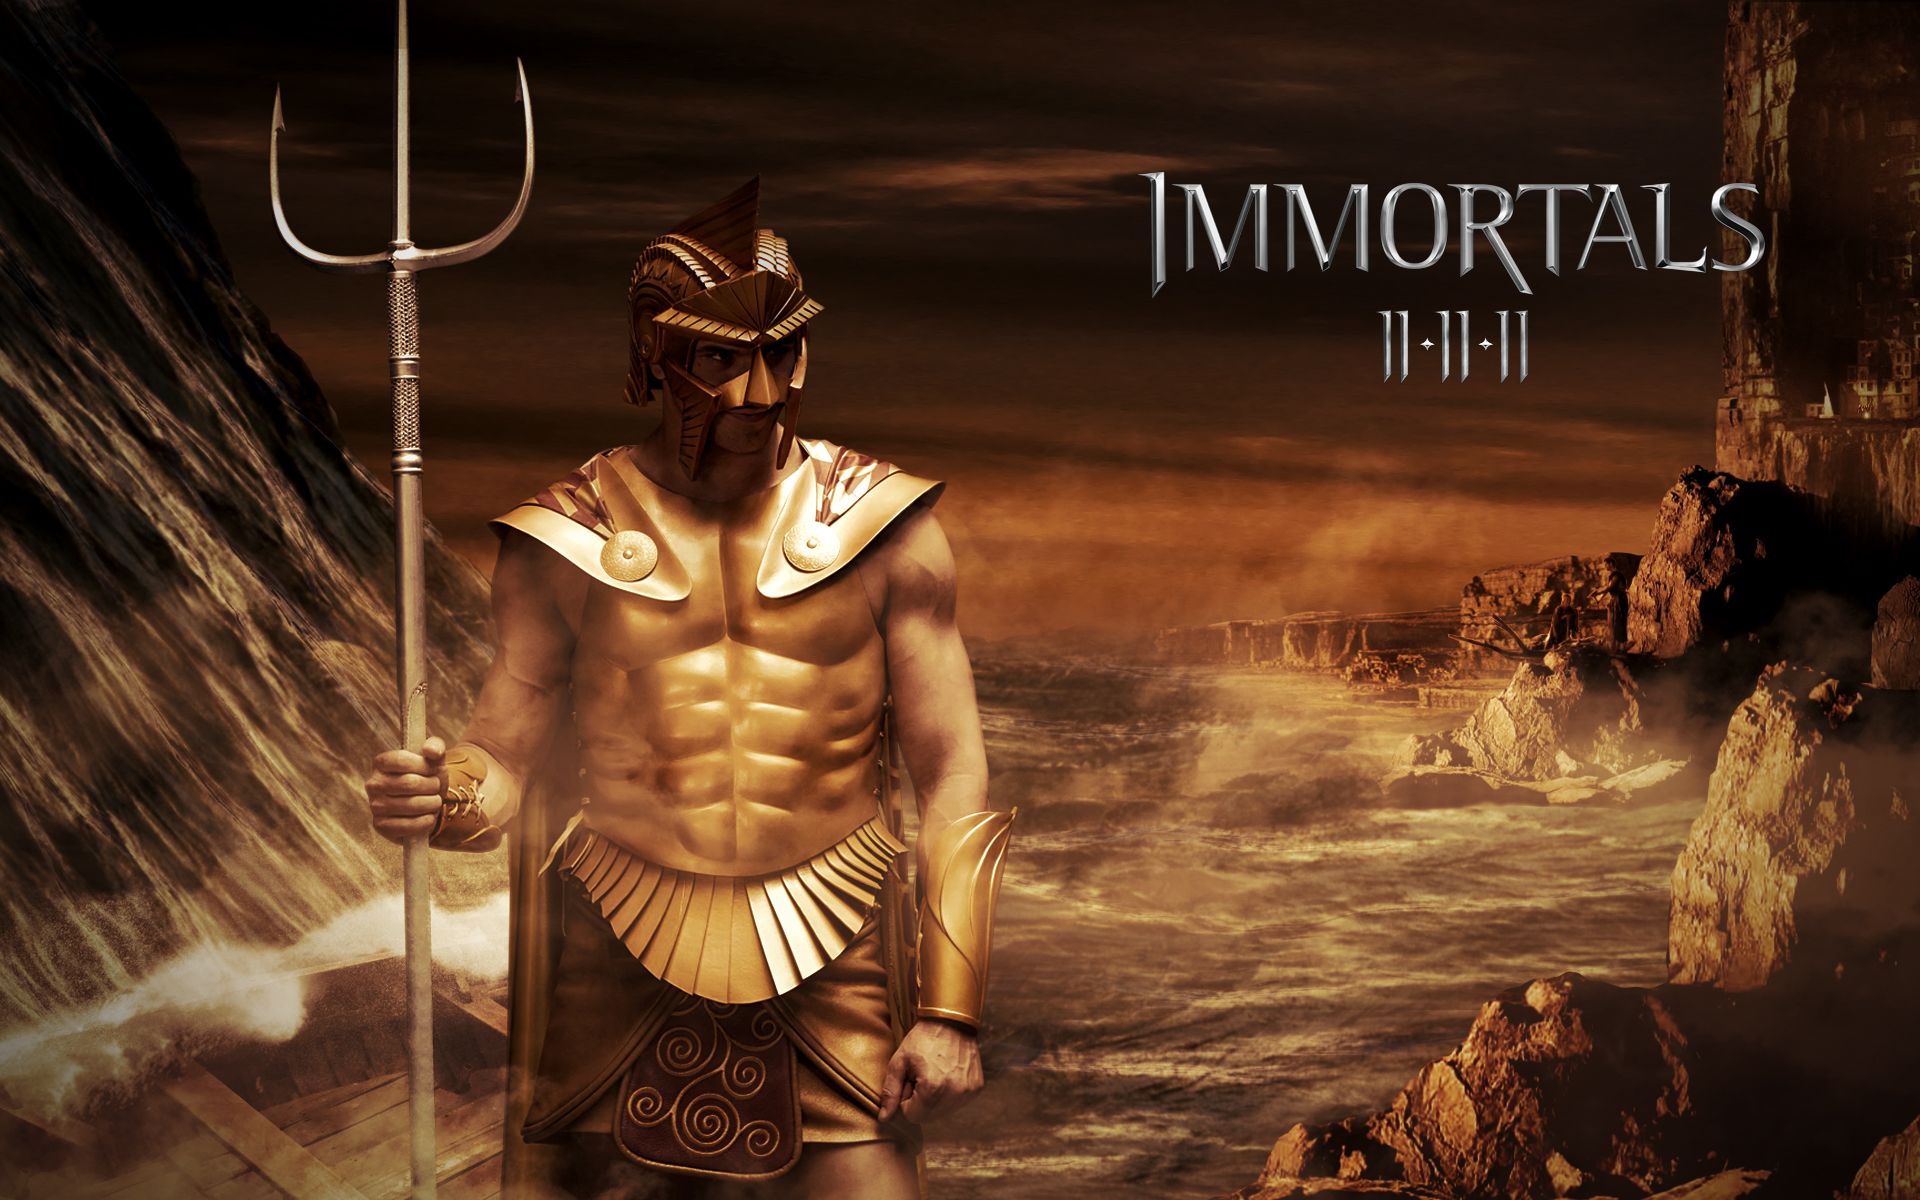 Immortals | Free Desktop Wallpapers for HD, Widescreen and Mobile